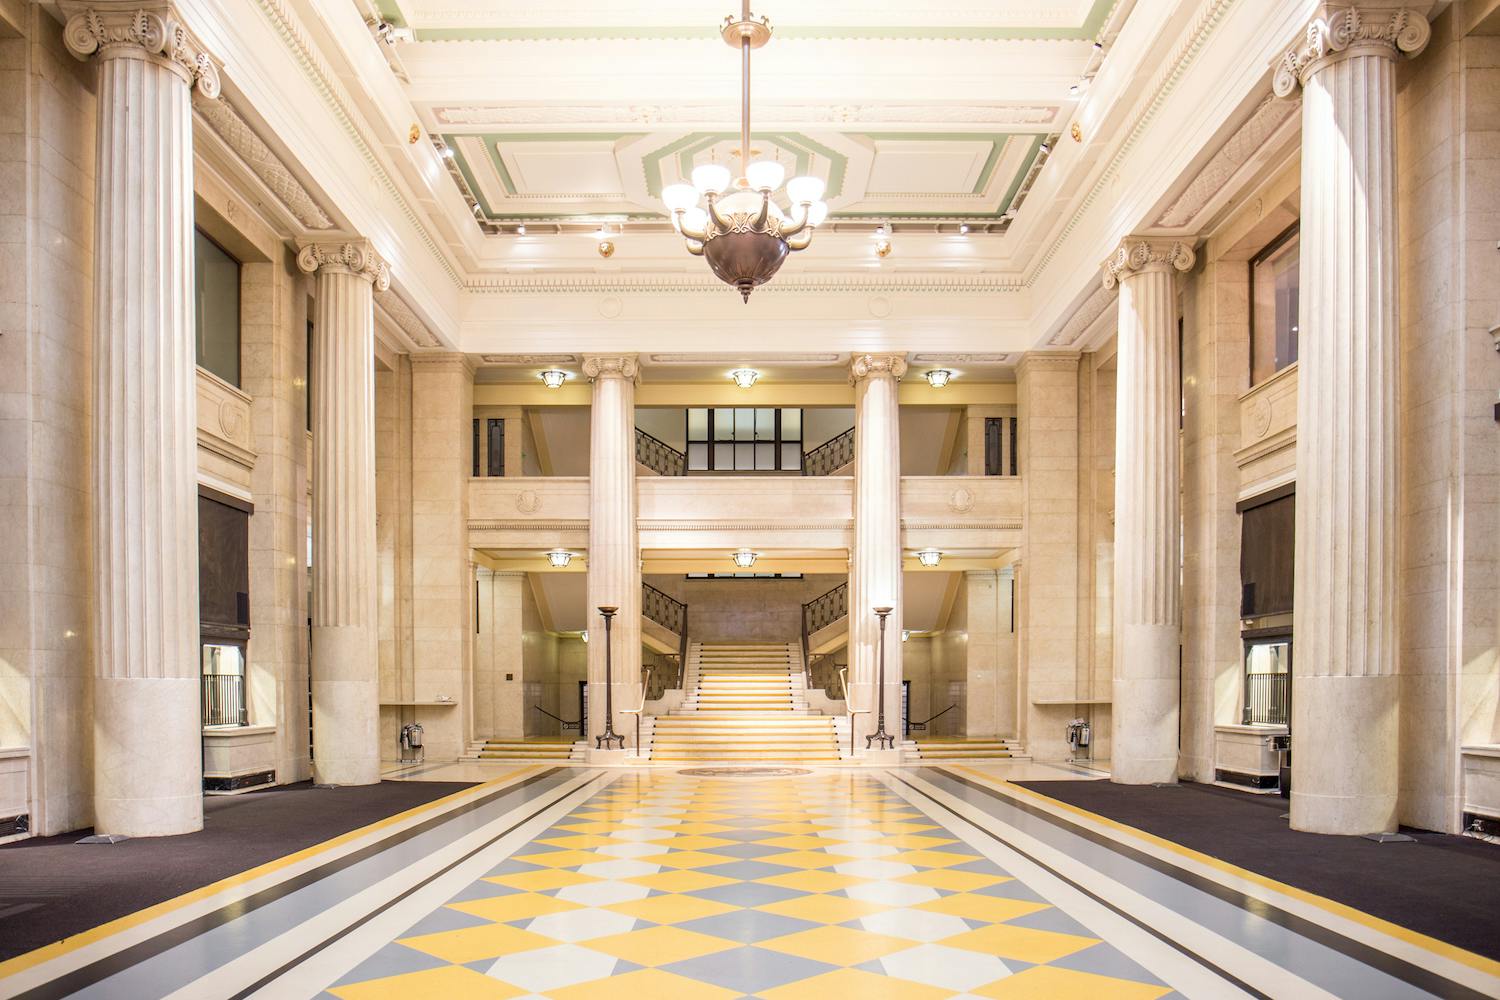 Venues - The Banking Hall